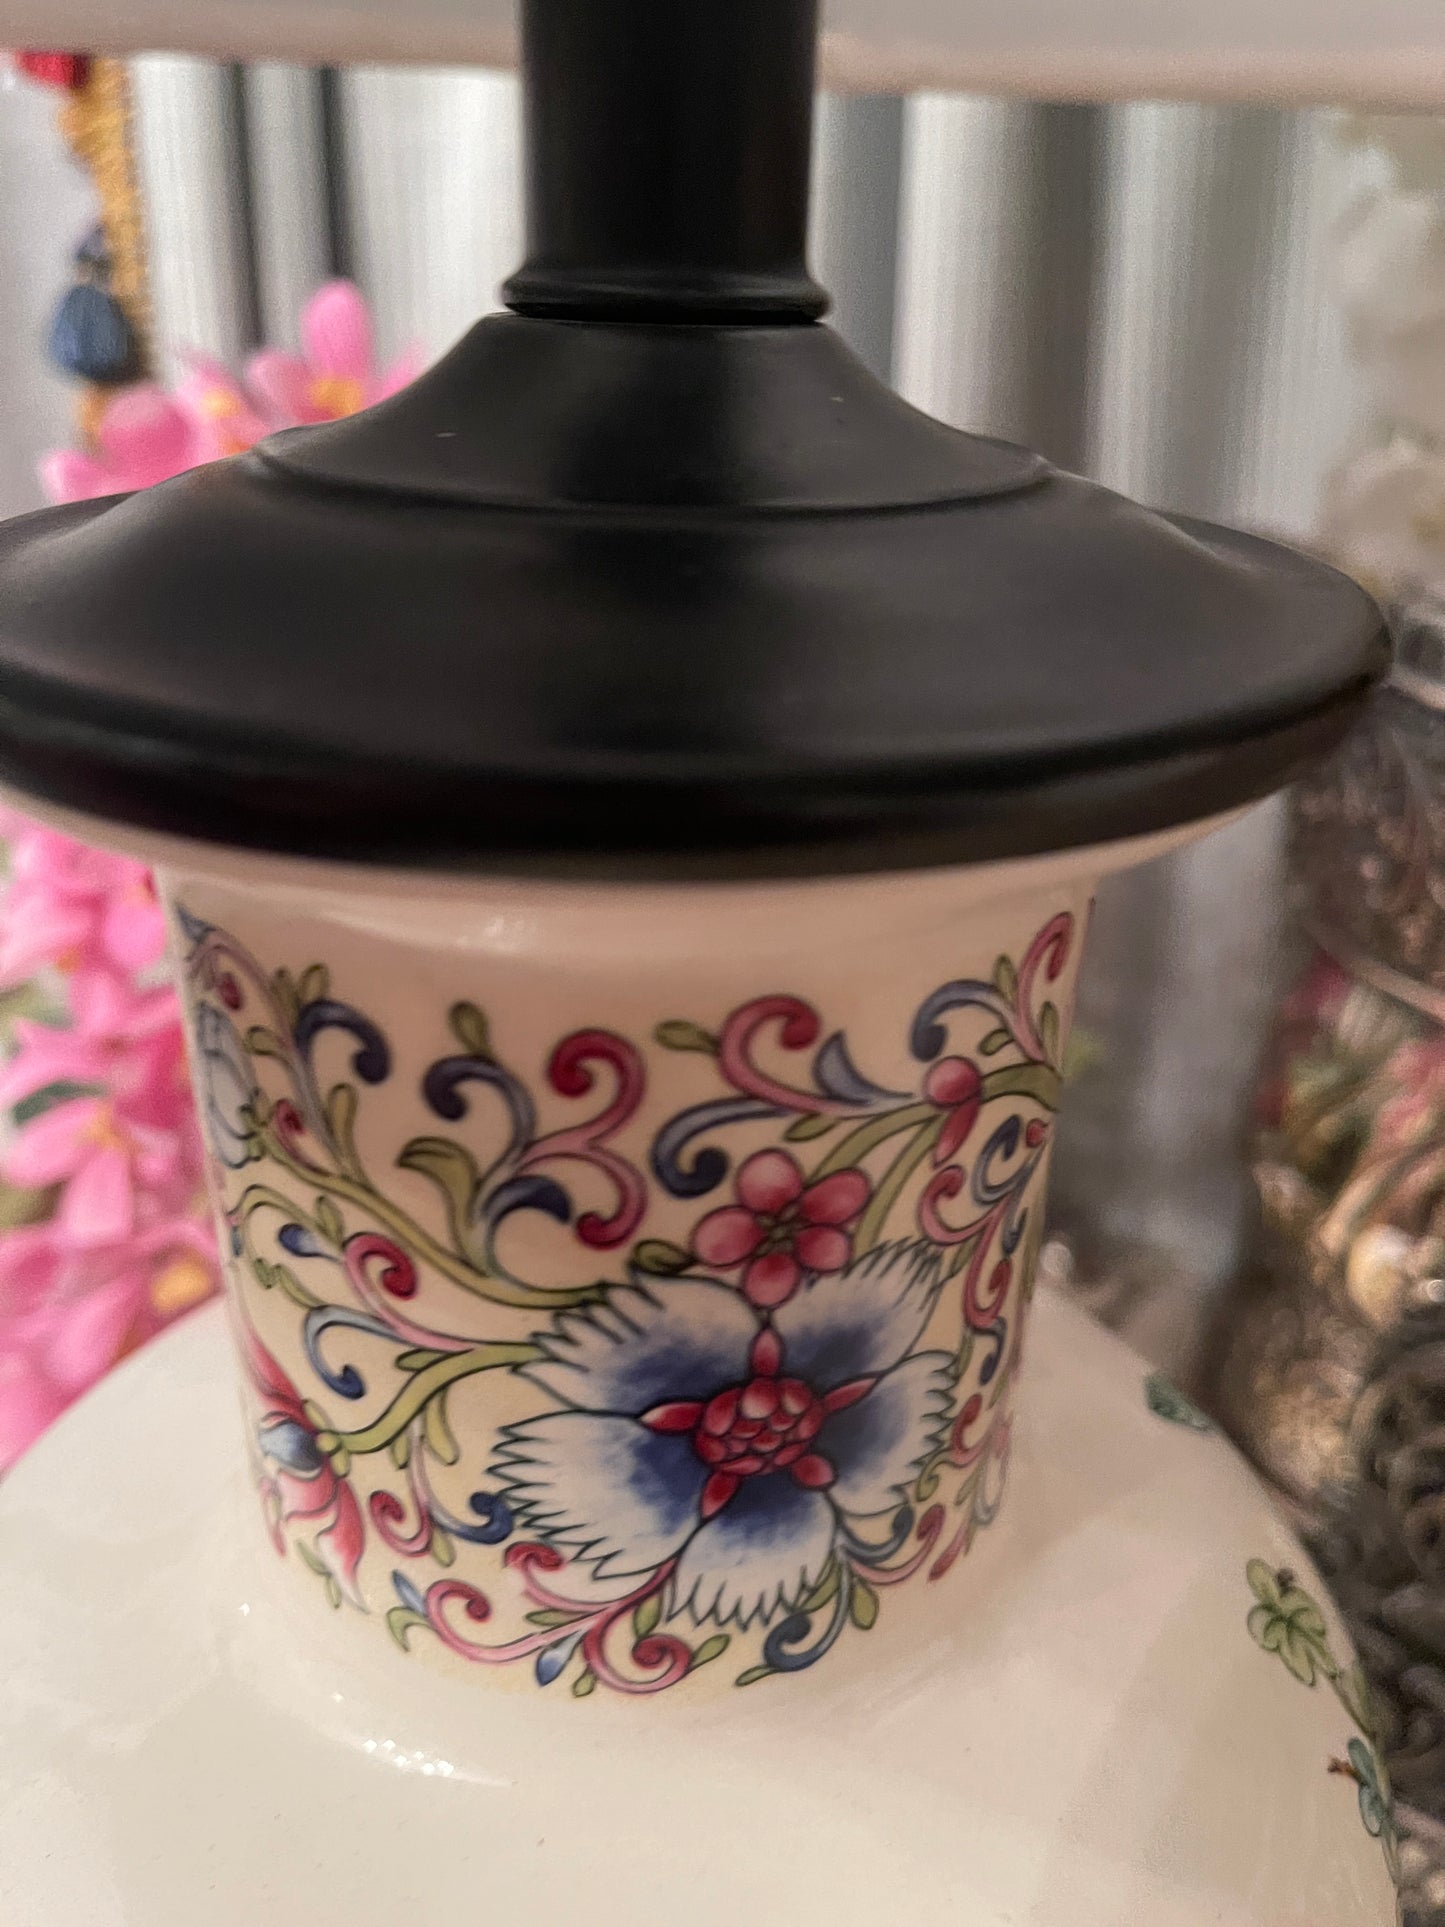 Vibrant Chinoiserie Lamp, Double Phoenix and Floral Chinoiserie Design, Ornate Metal Base